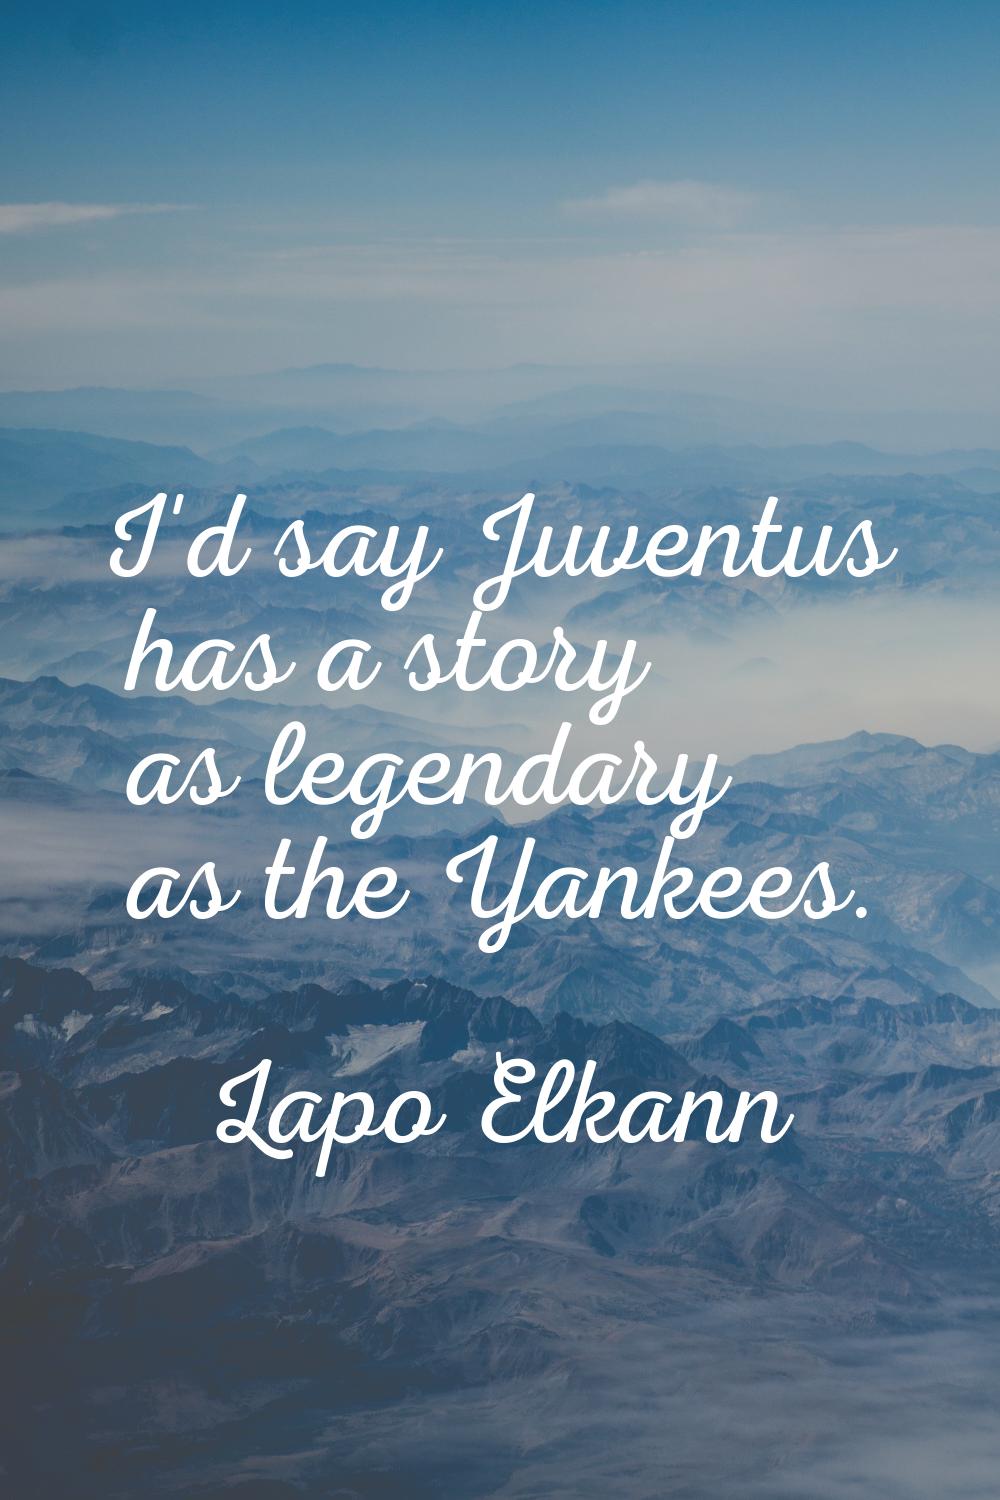 I'd say Juventus has a story as legendary as the Yankees.